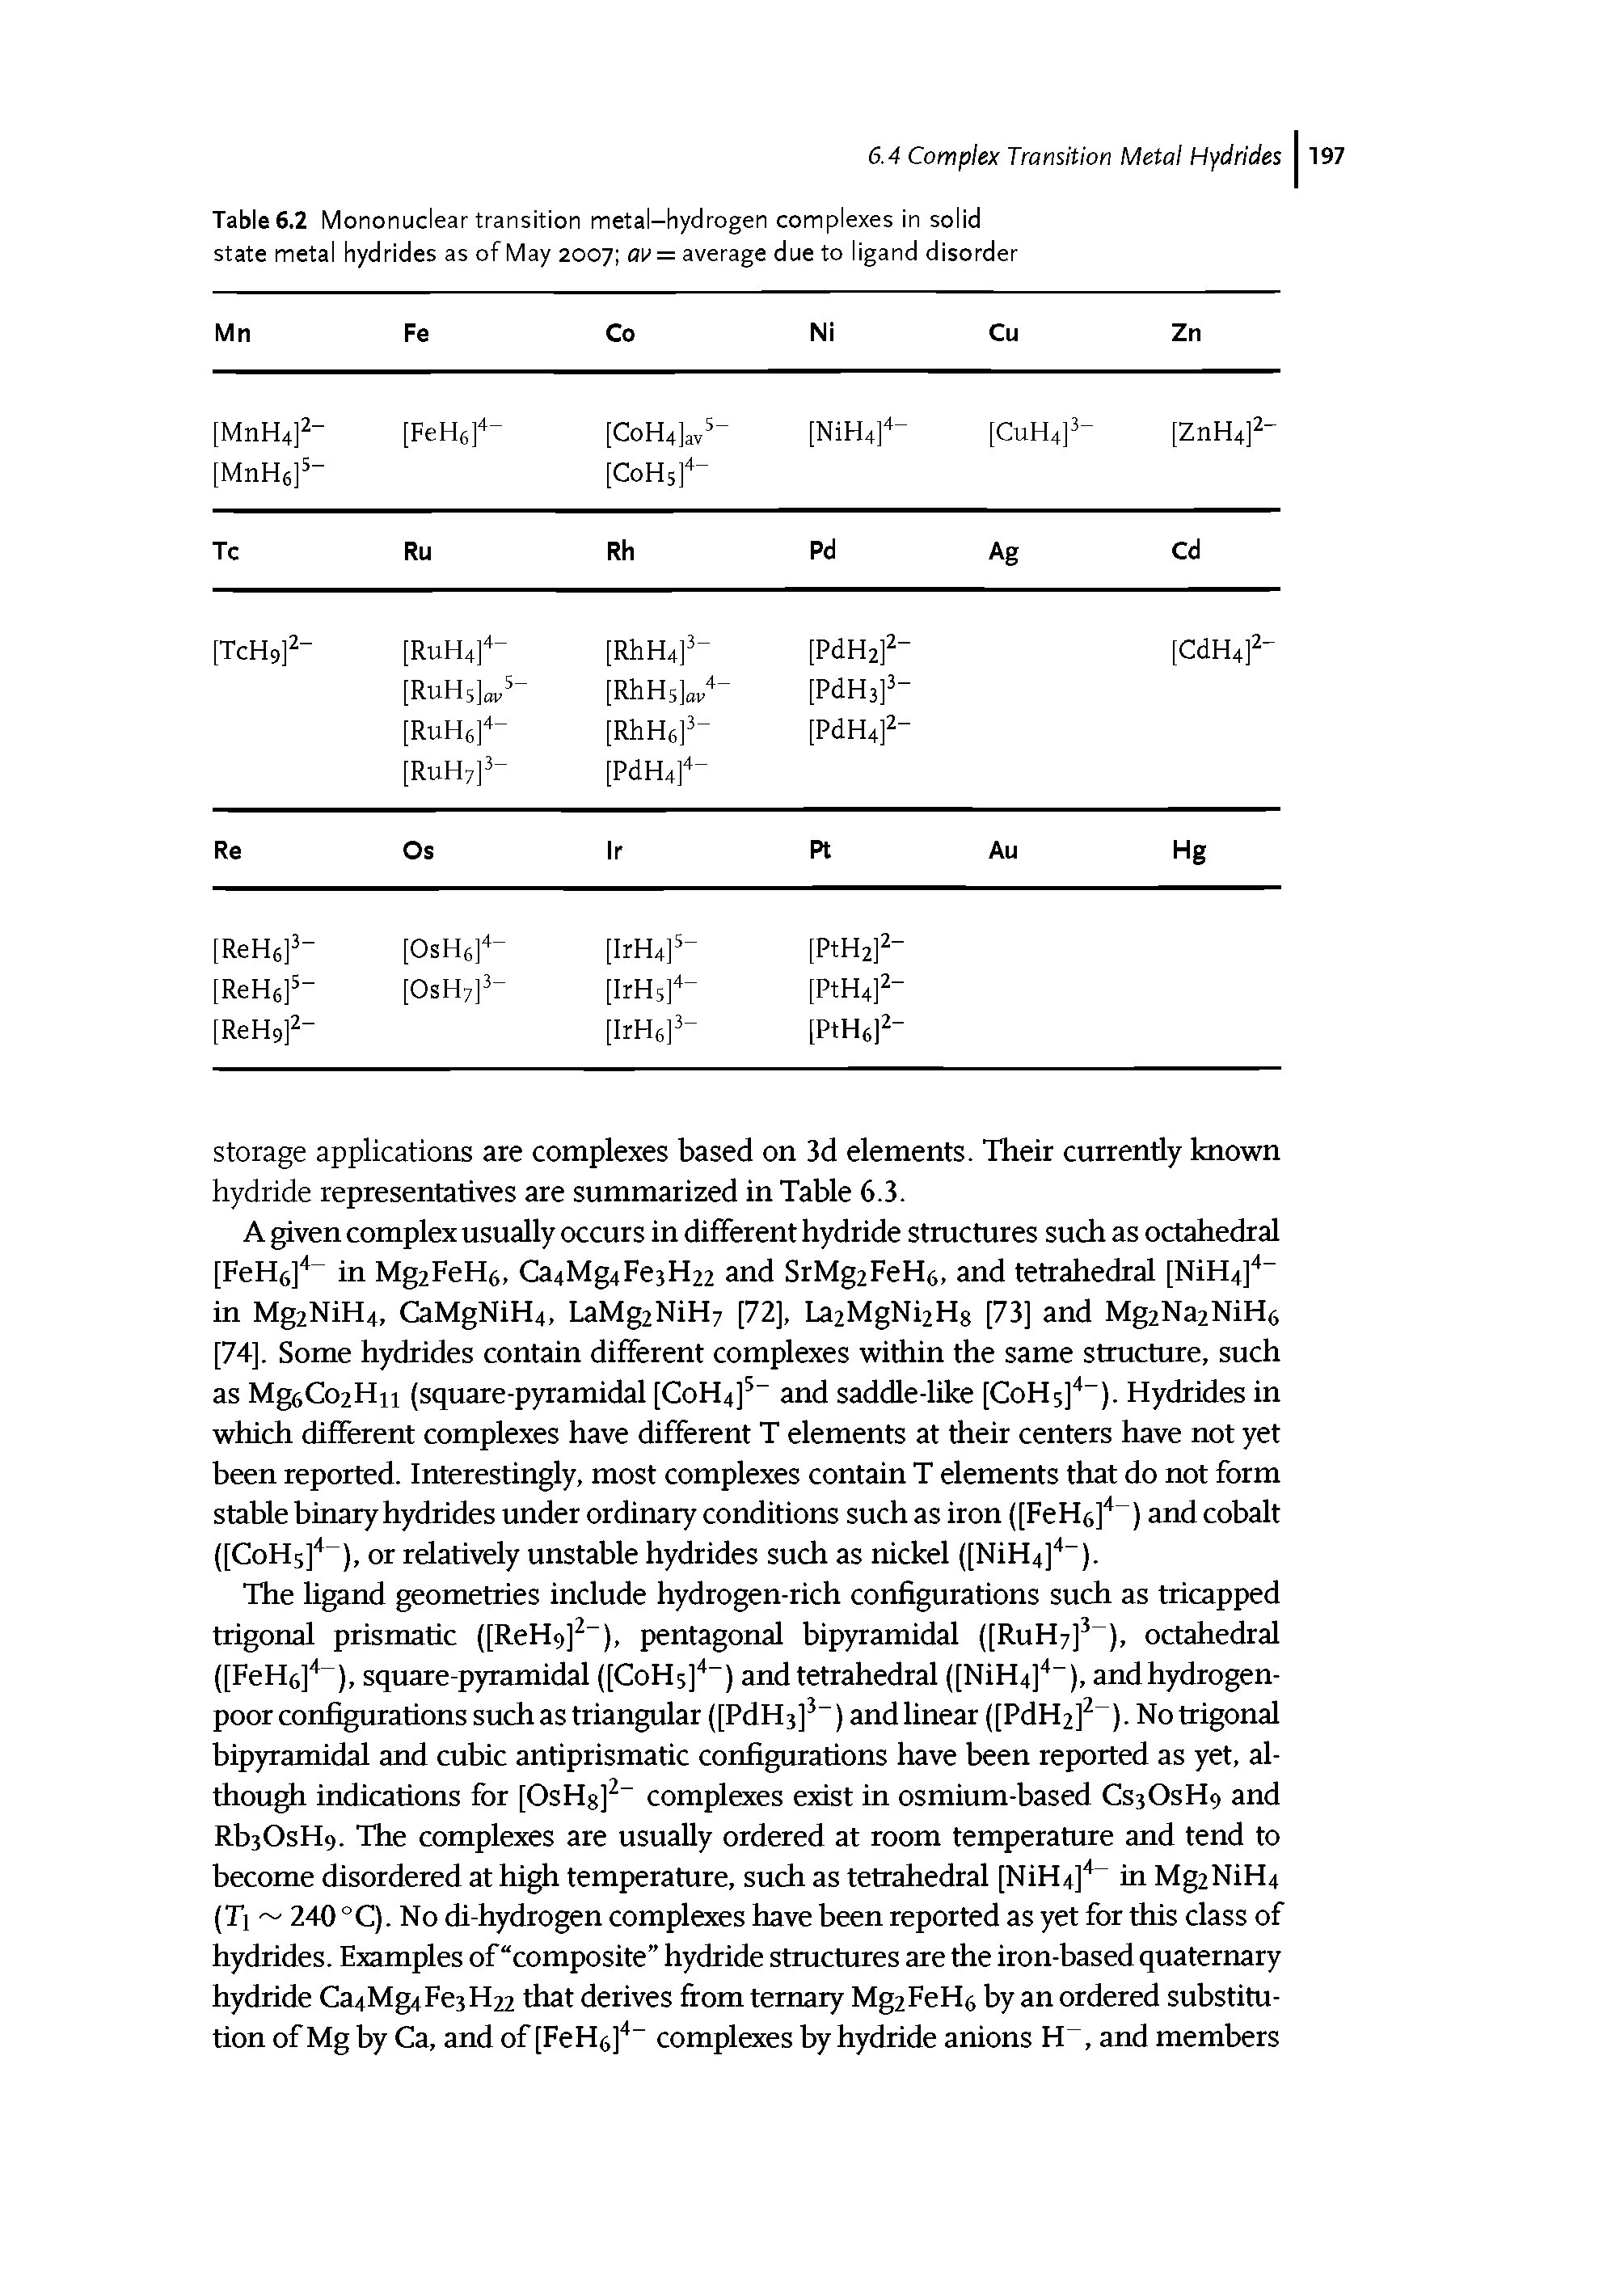 Table 6.2 Mononuclear transition metal-hydrogen complexes in solid state metal hydrides as of May 2007 ou = average due to ligand disorder...